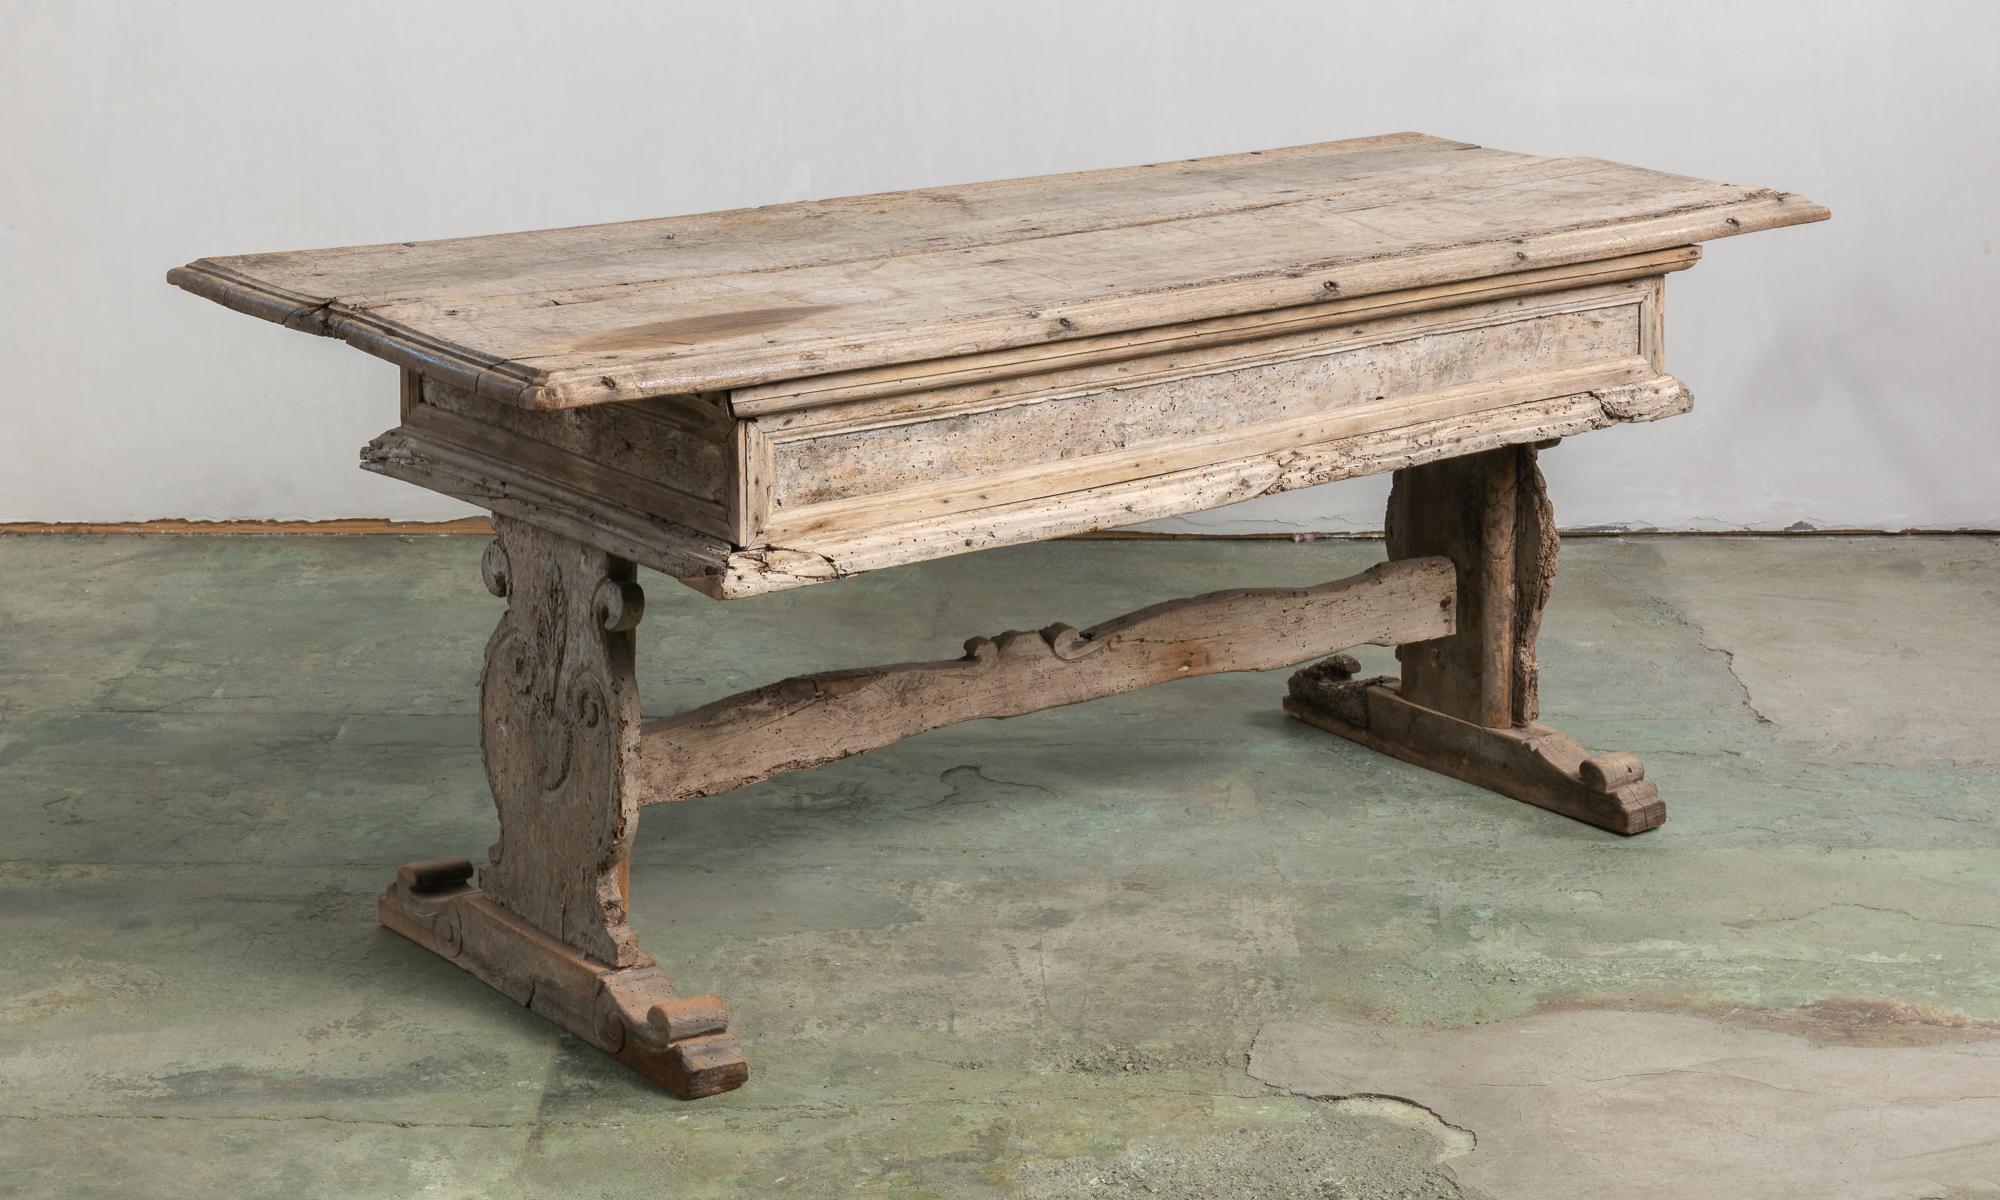 Primitive refectory table, Italy, 17th century

Incredible, heavily patinated form with hand carved detailing throughout.

This piece ships from Providence, Rhode Island.